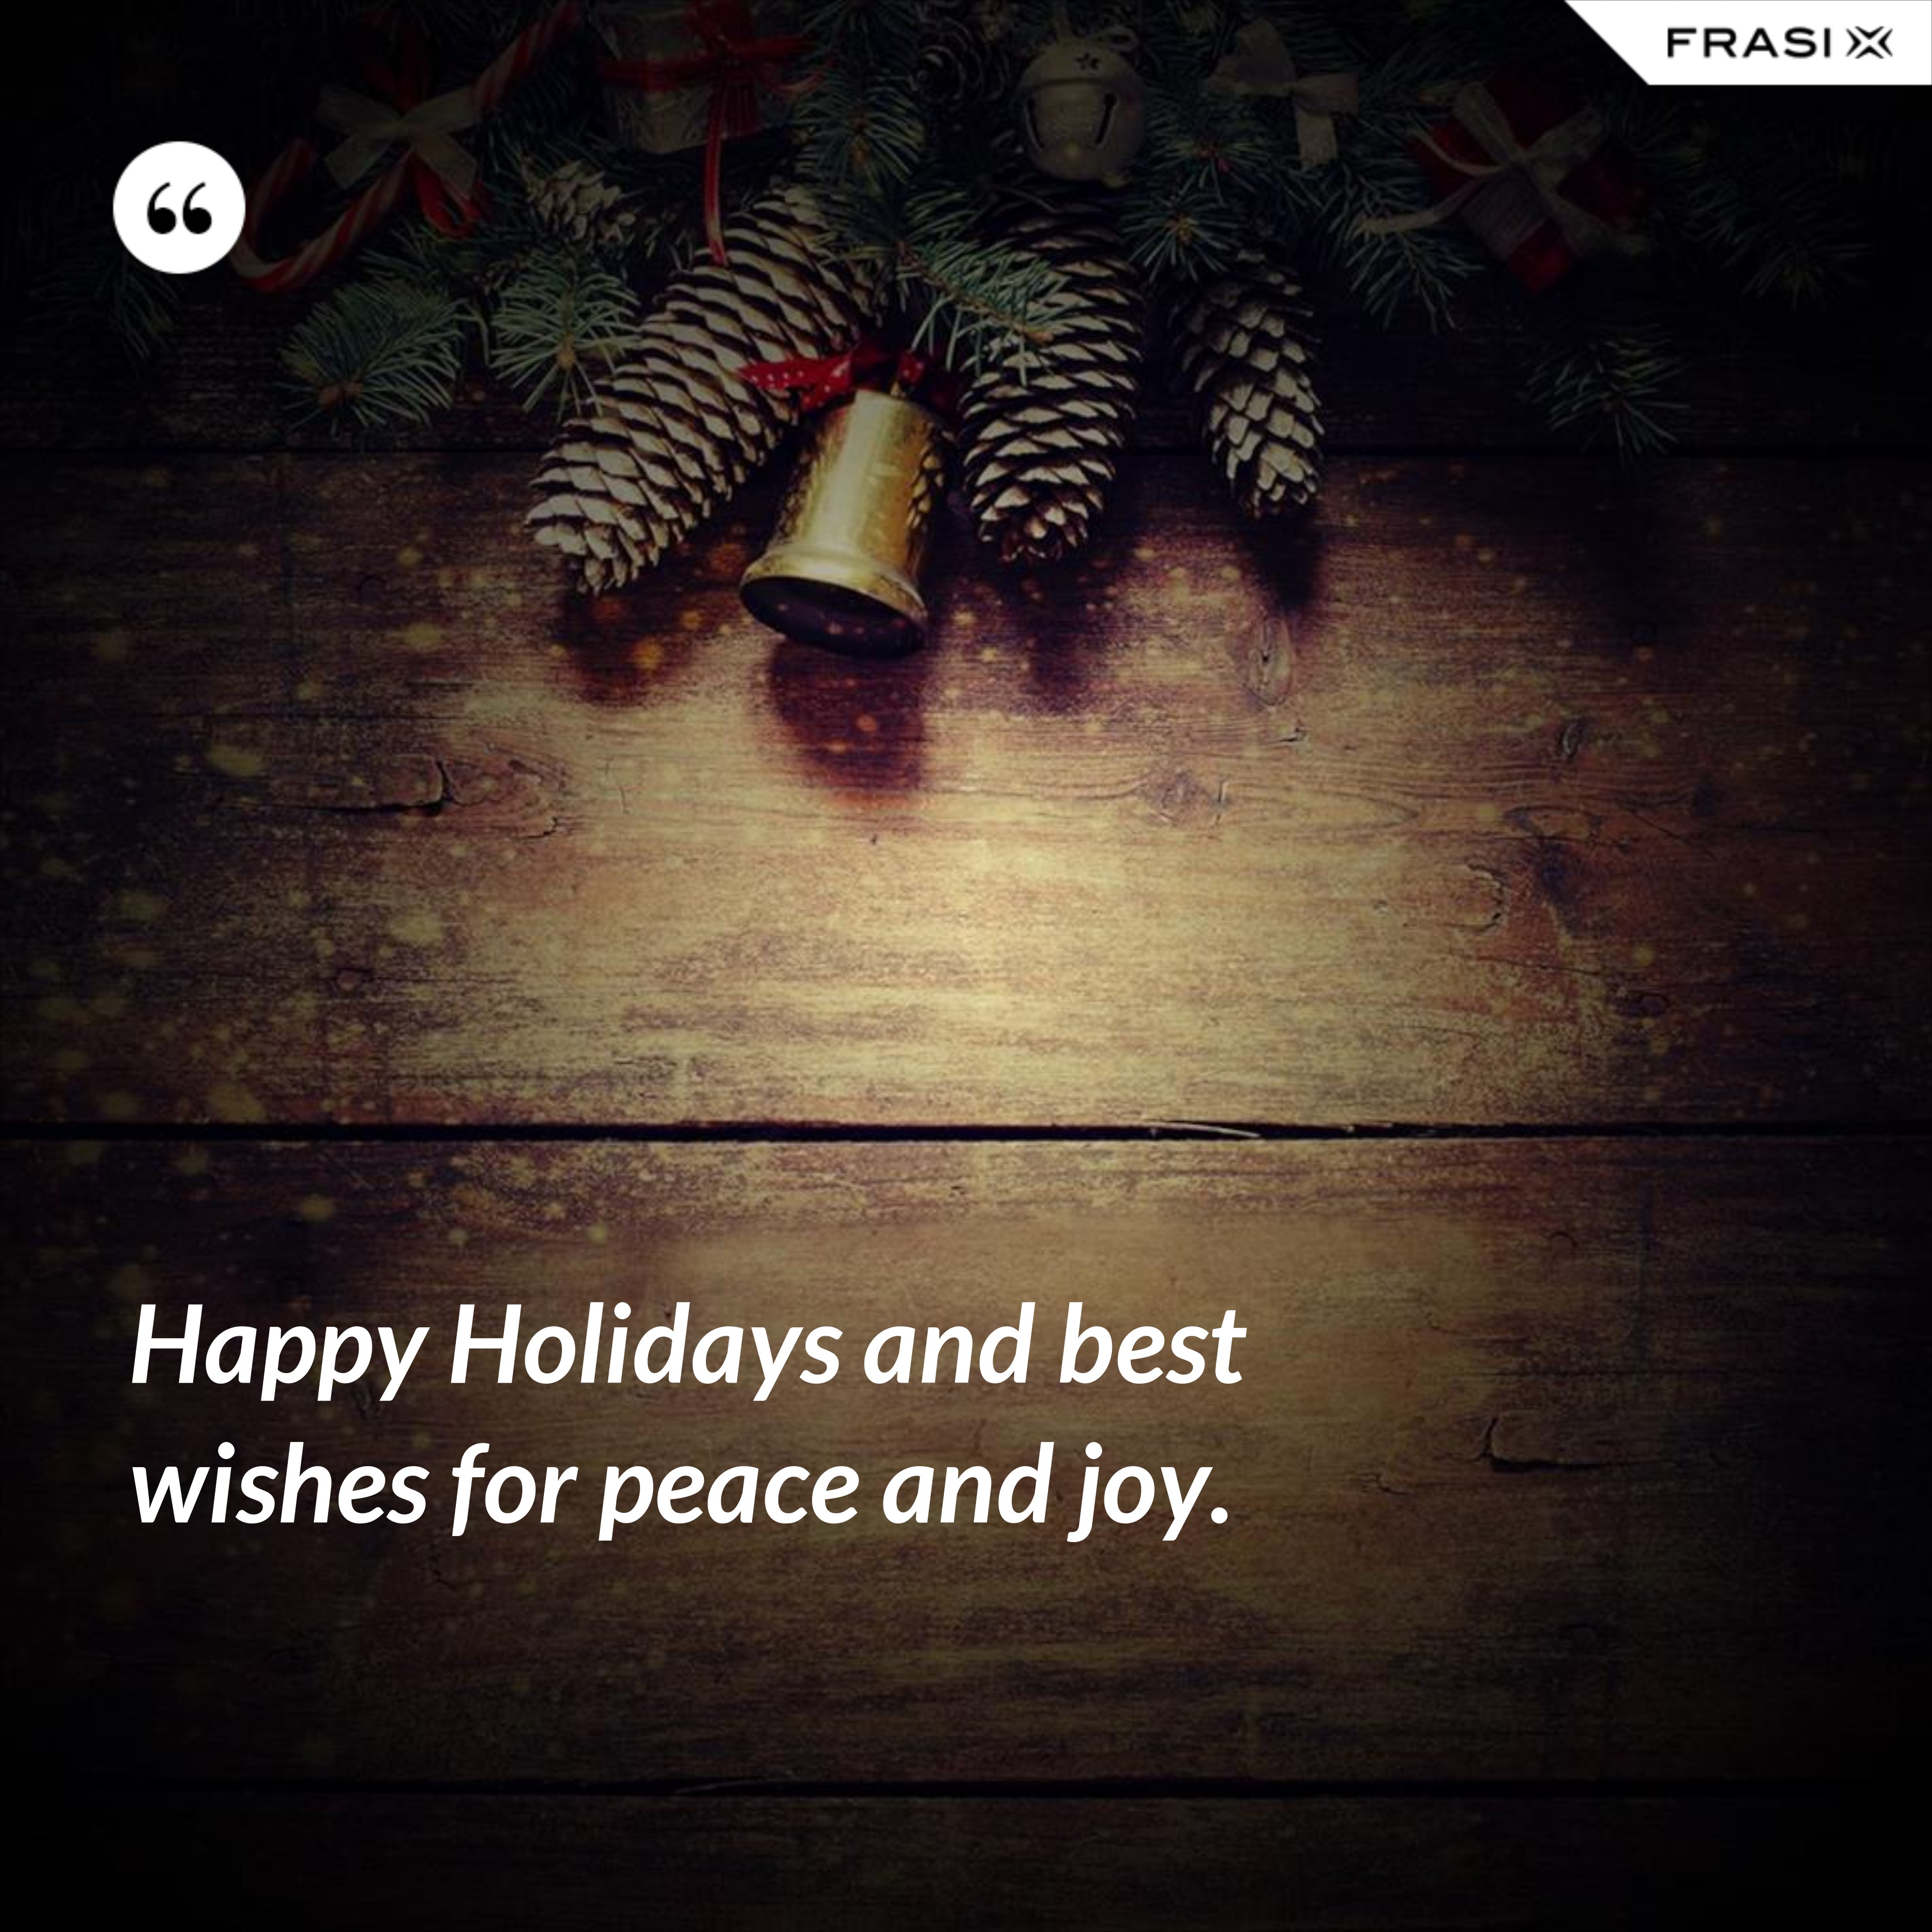 Happy Holidays and best wishes for peace and joy. - Anonimo